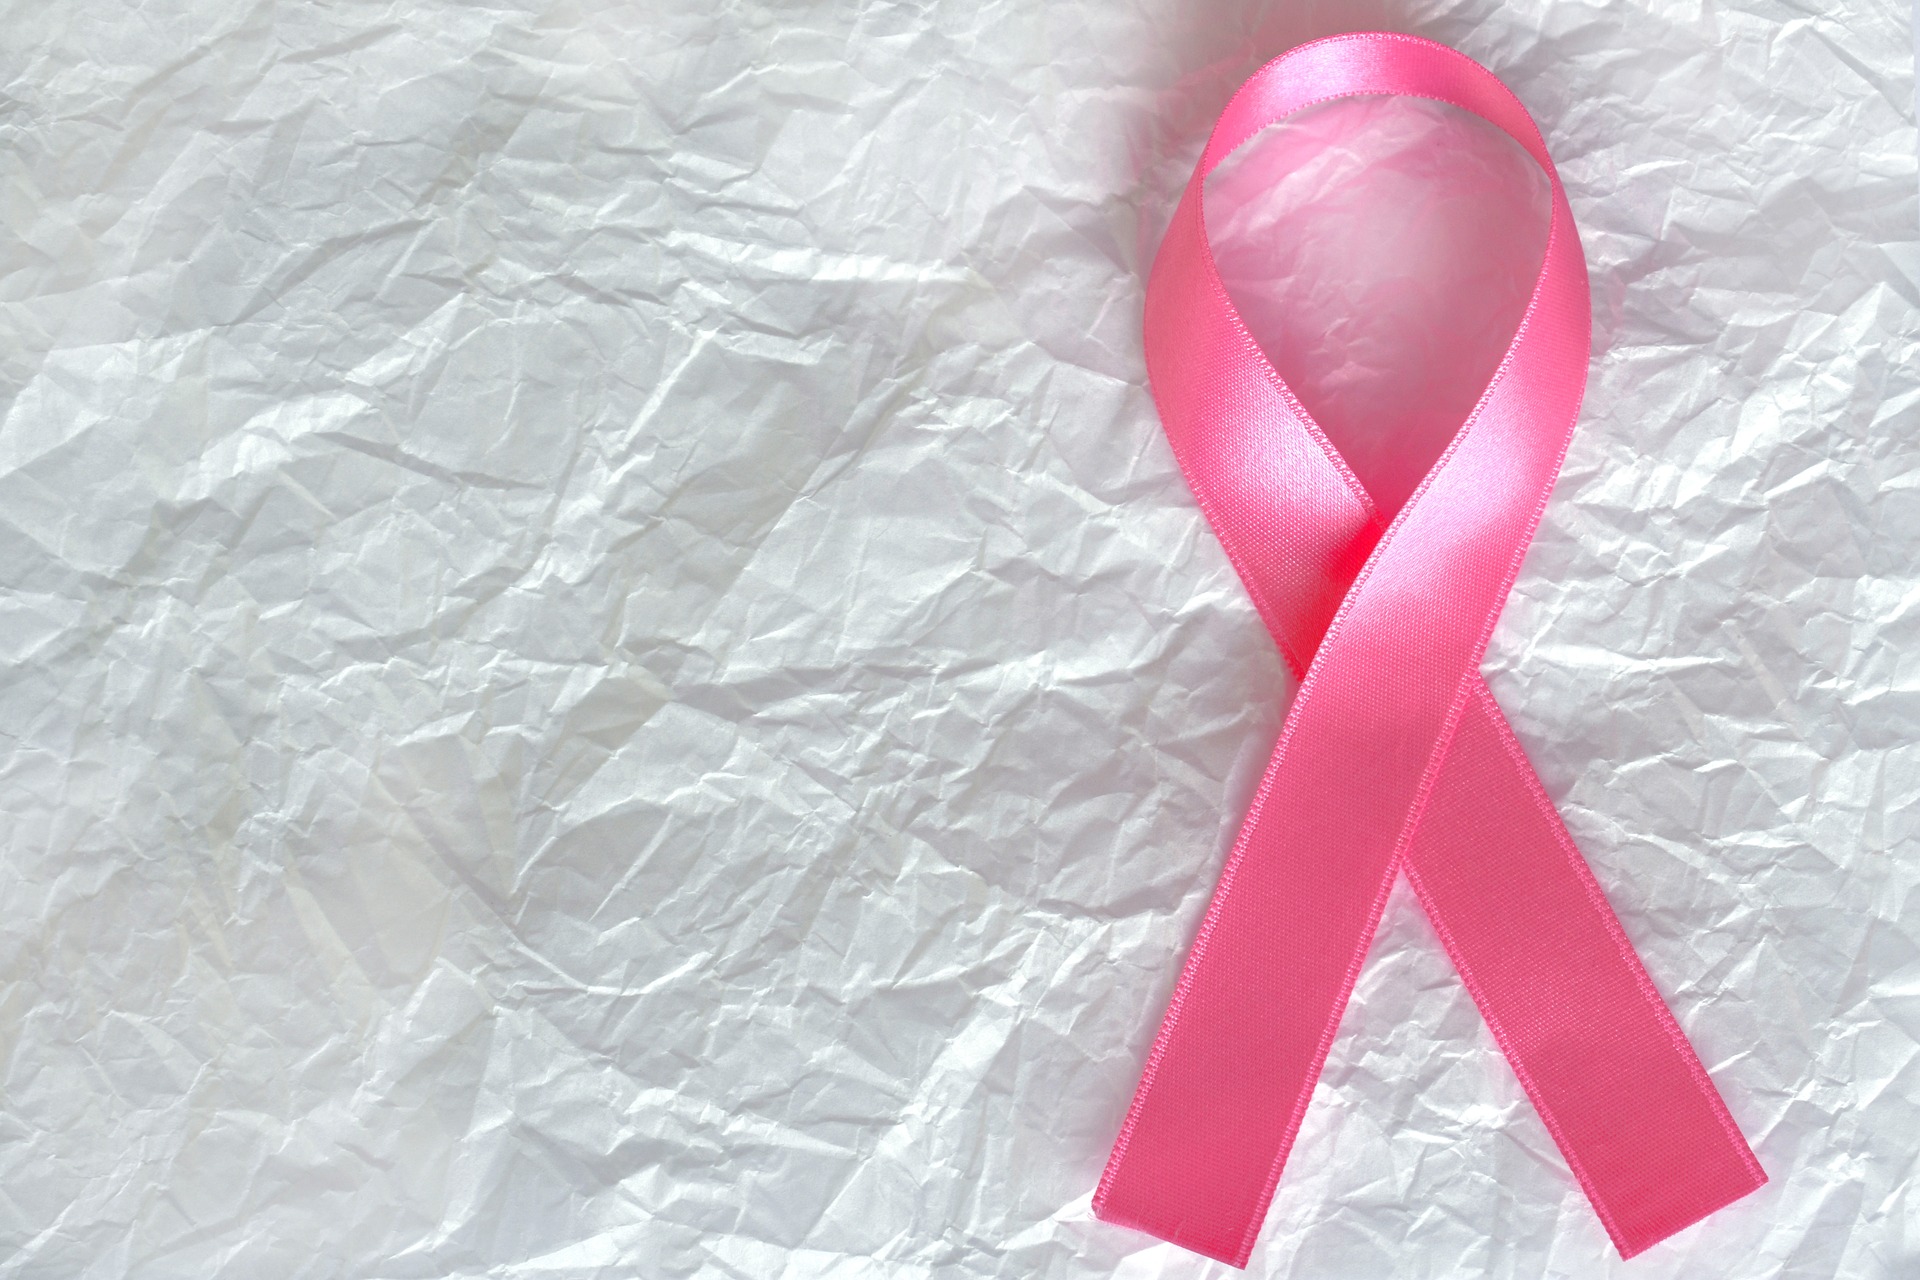 My Husband Didn’t Make it (But I Did). Here are 5 Things I Want You to Know About Cancer